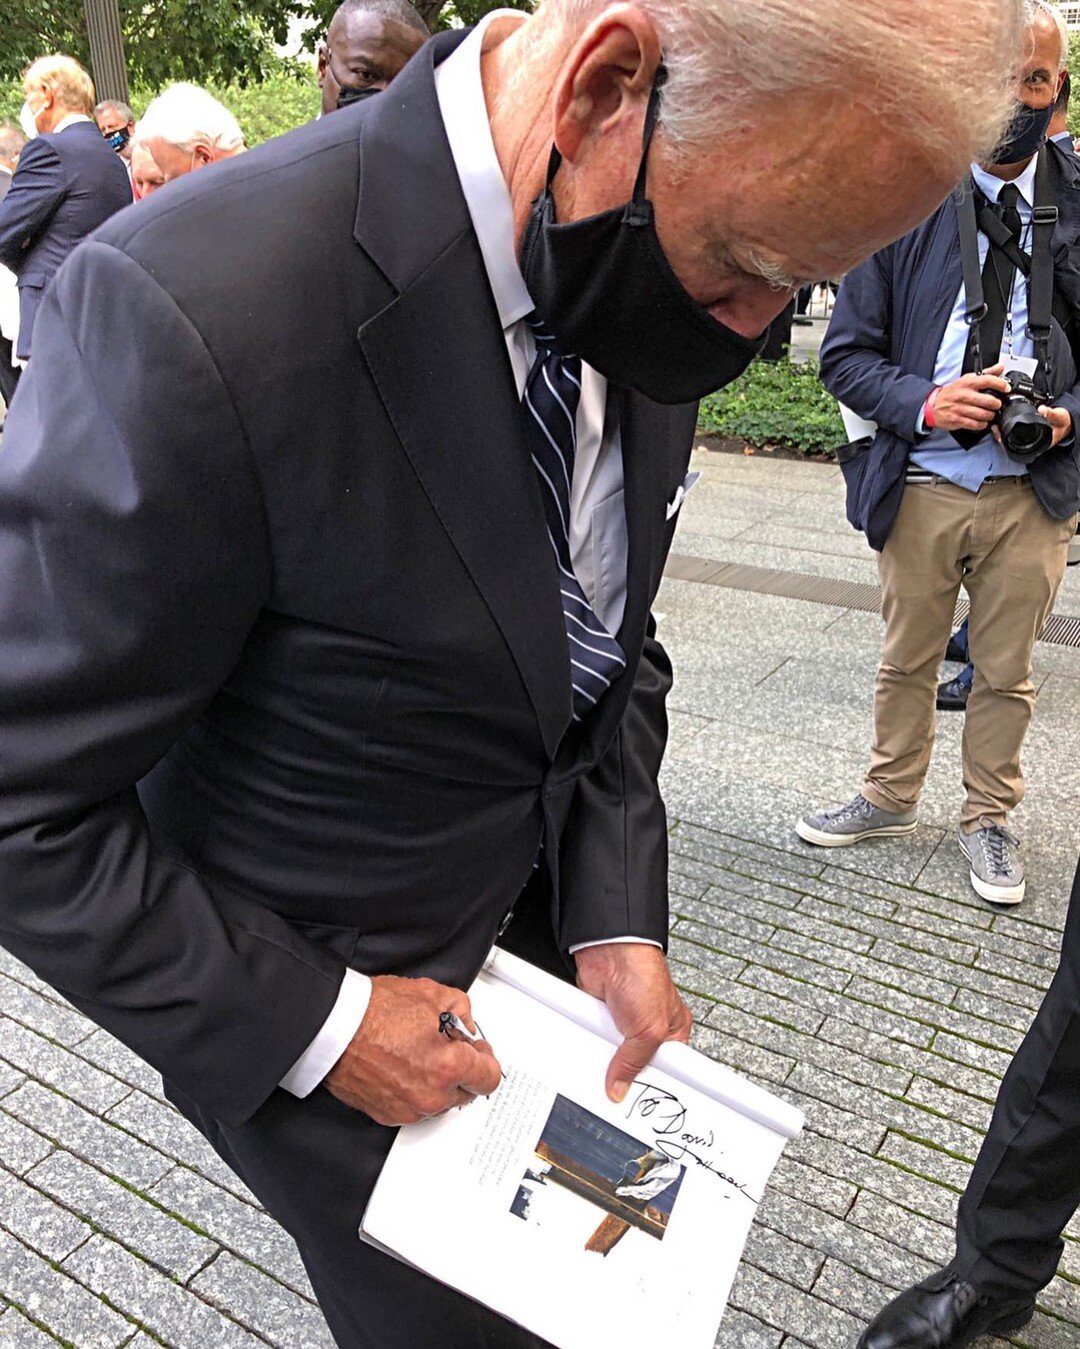 Biden Pre-President signing a book I did&hellip;